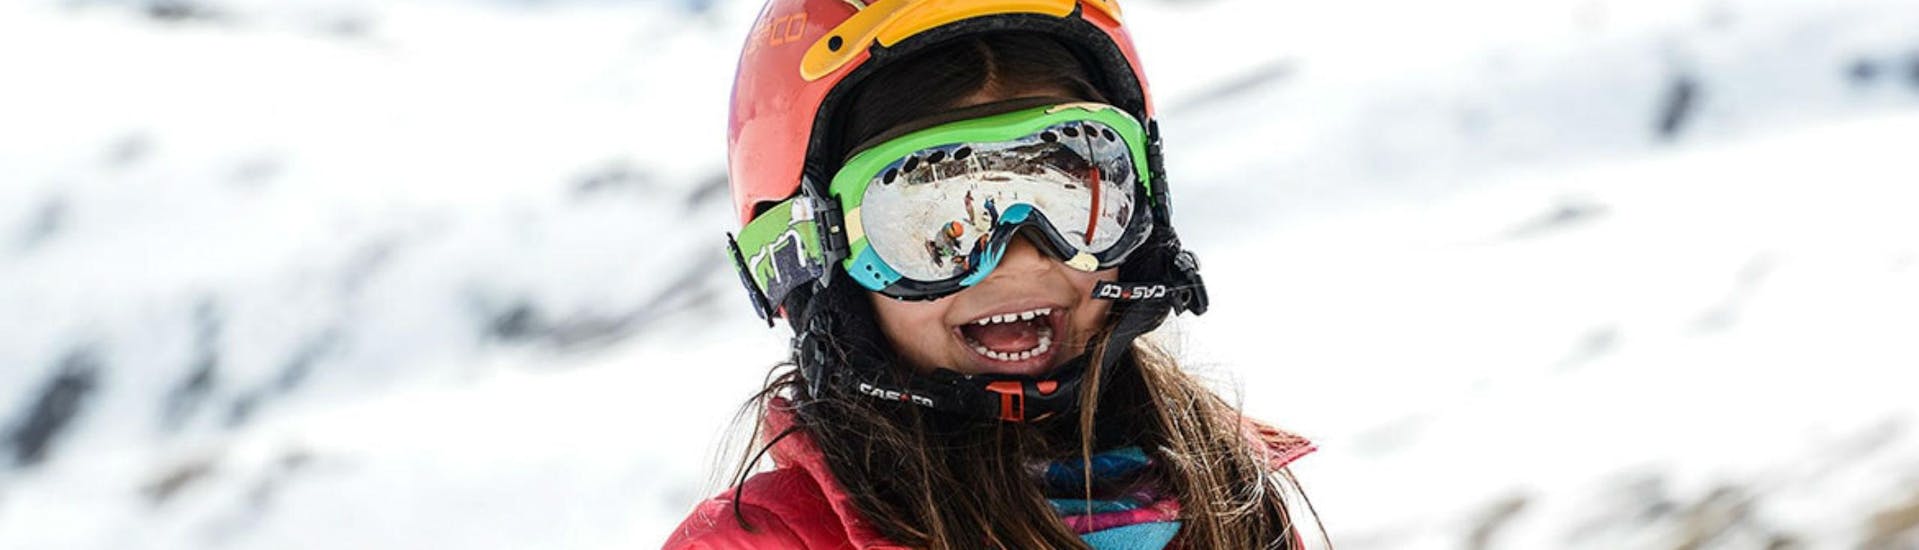 A young girl is laughing and seemingly enjoying herself during her Private Ski Lessons for Kids - High Season with the ski school Prosneige Méribel.